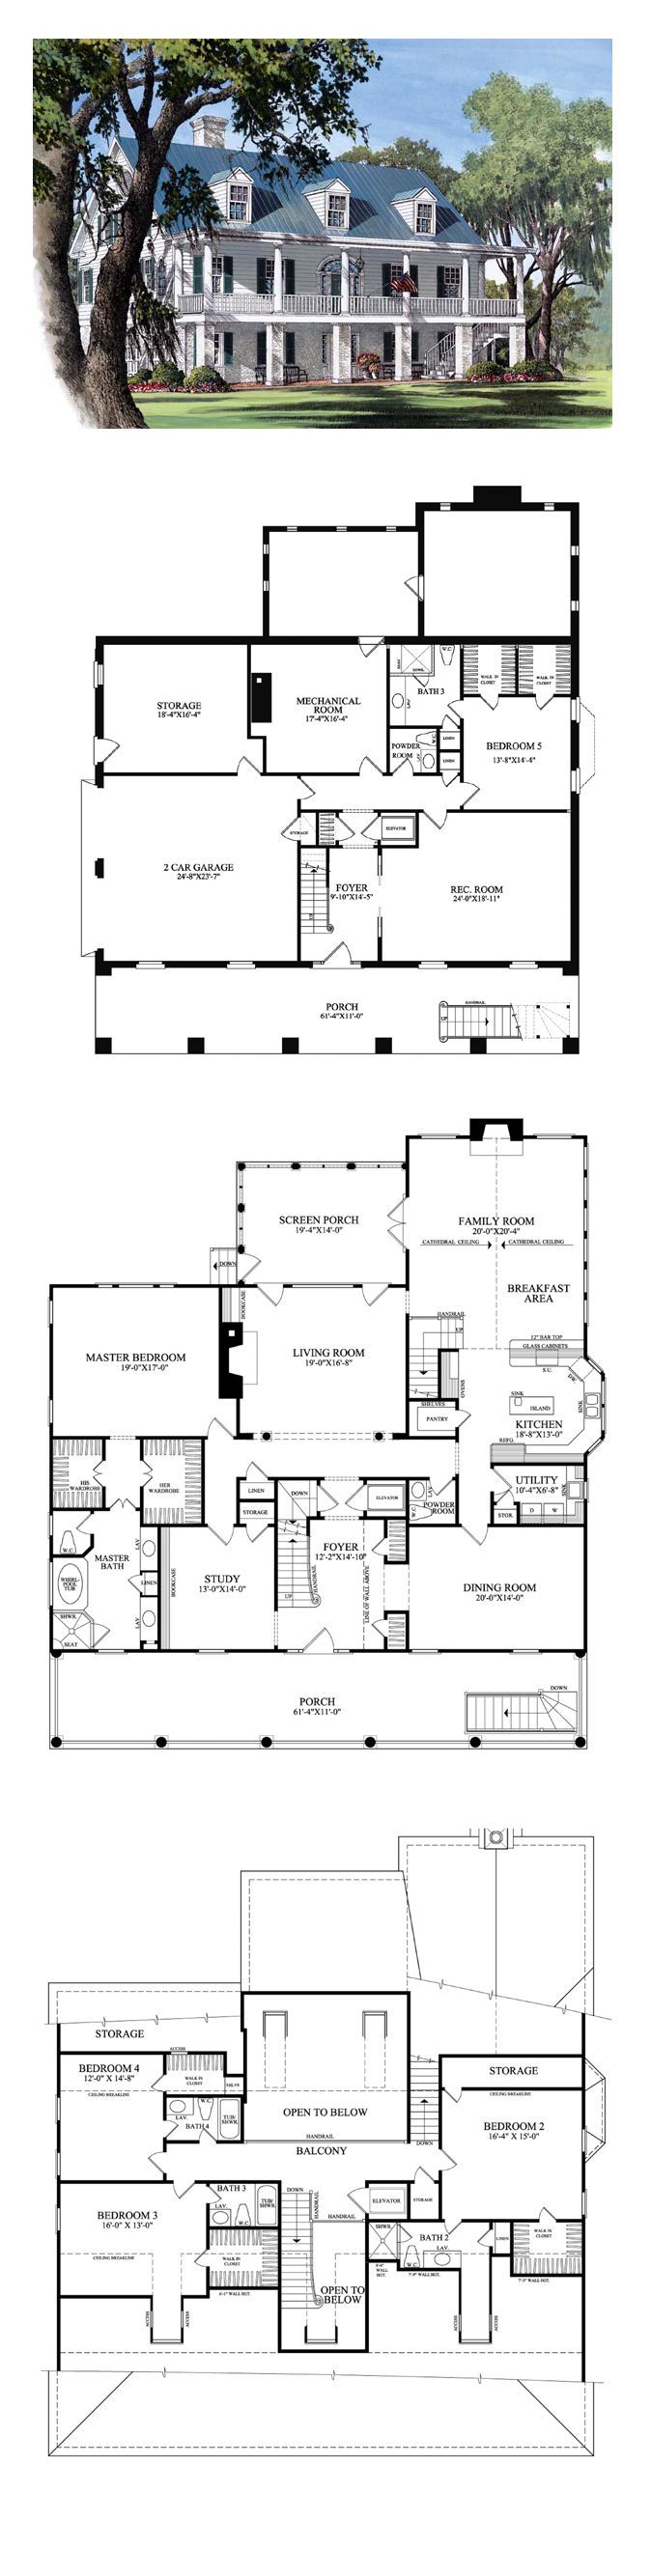 Plantation House Plan 86178 | Total Living Area: 4298 sq. ft., 5 bedrooms and 4.2 bathrooms. #plantationhome